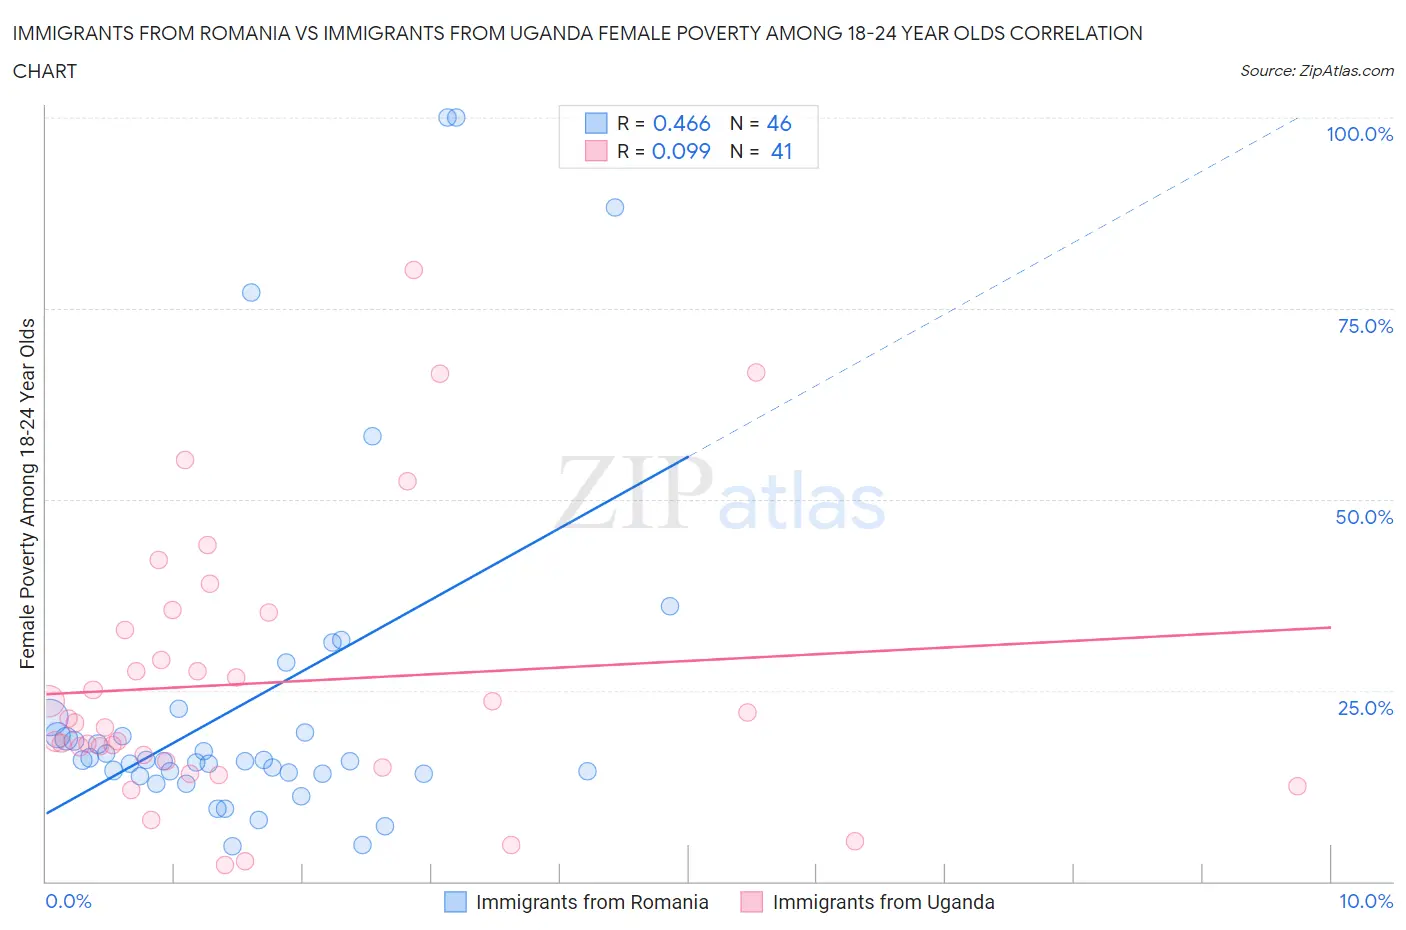 Immigrants from Romania vs Immigrants from Uganda Female Poverty Among 18-24 Year Olds